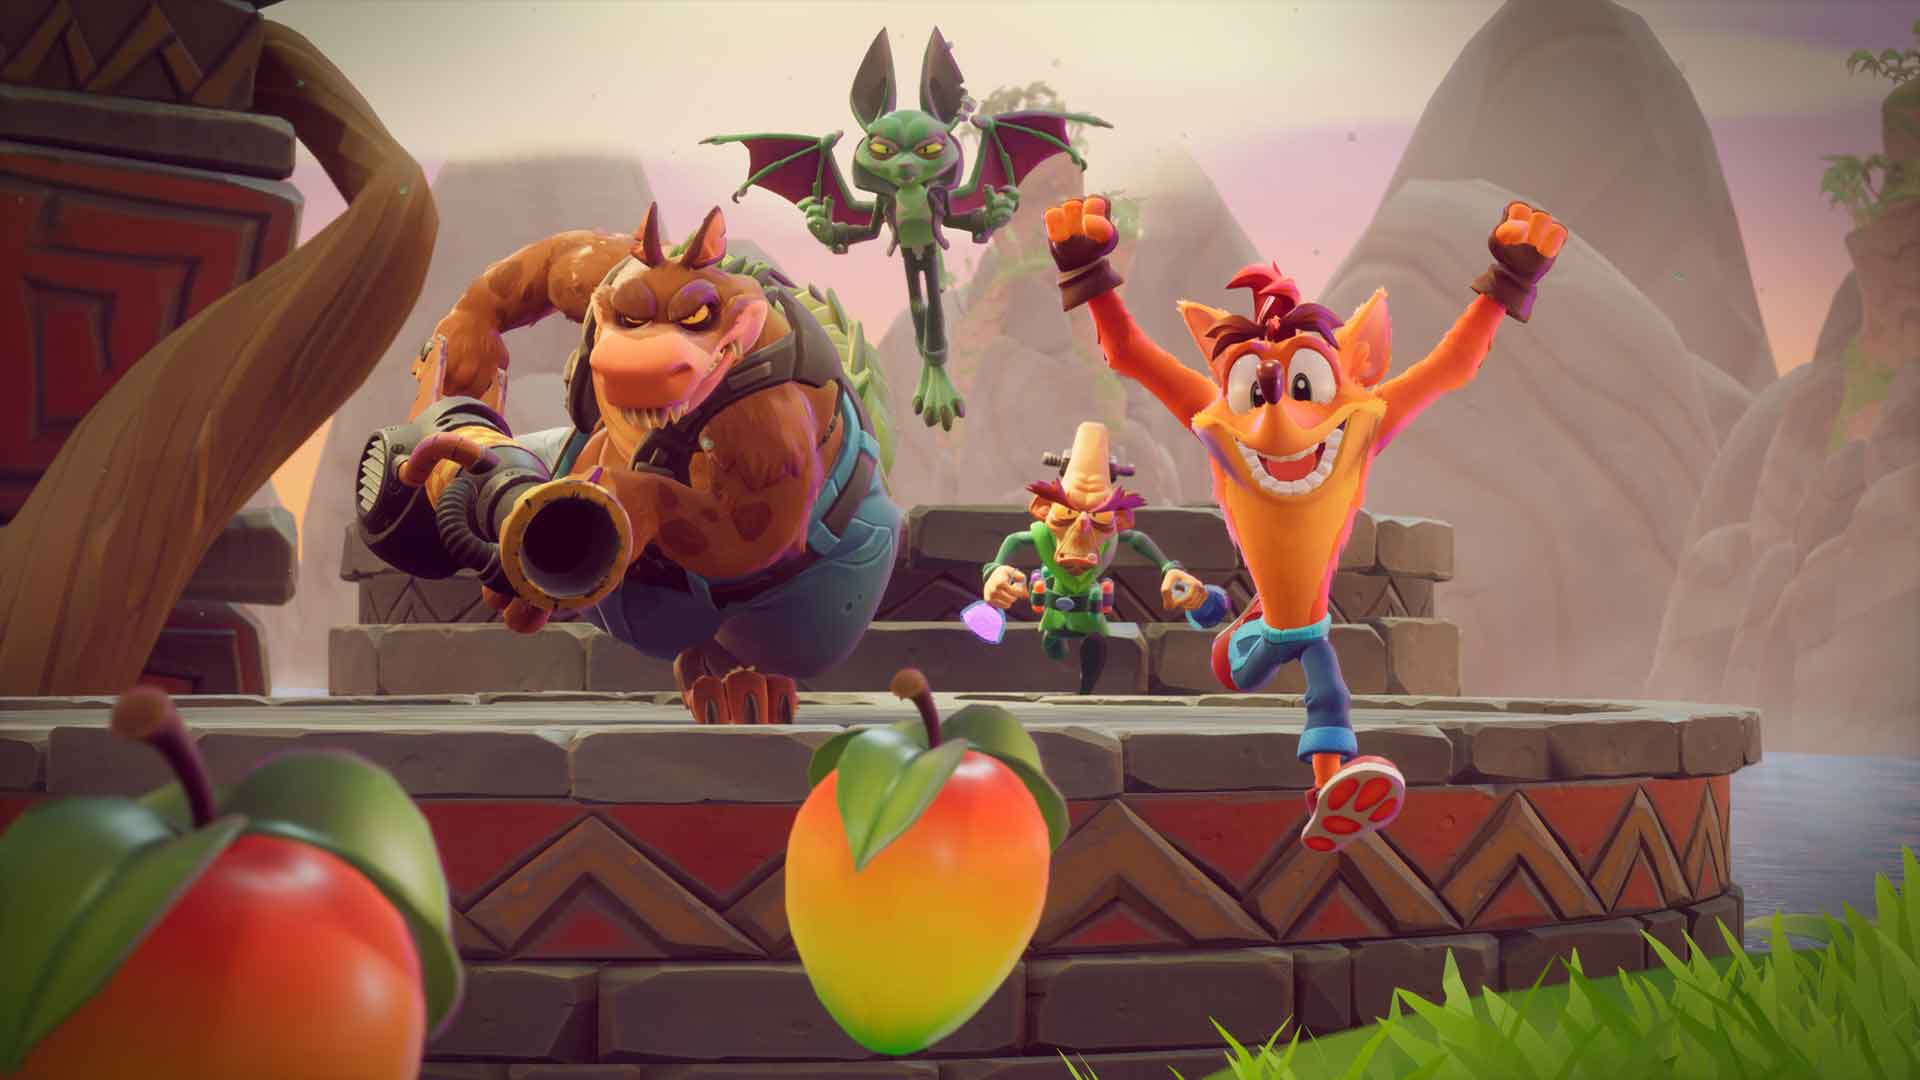 Play PlayStation Crash Bandicoot Online in your browser 